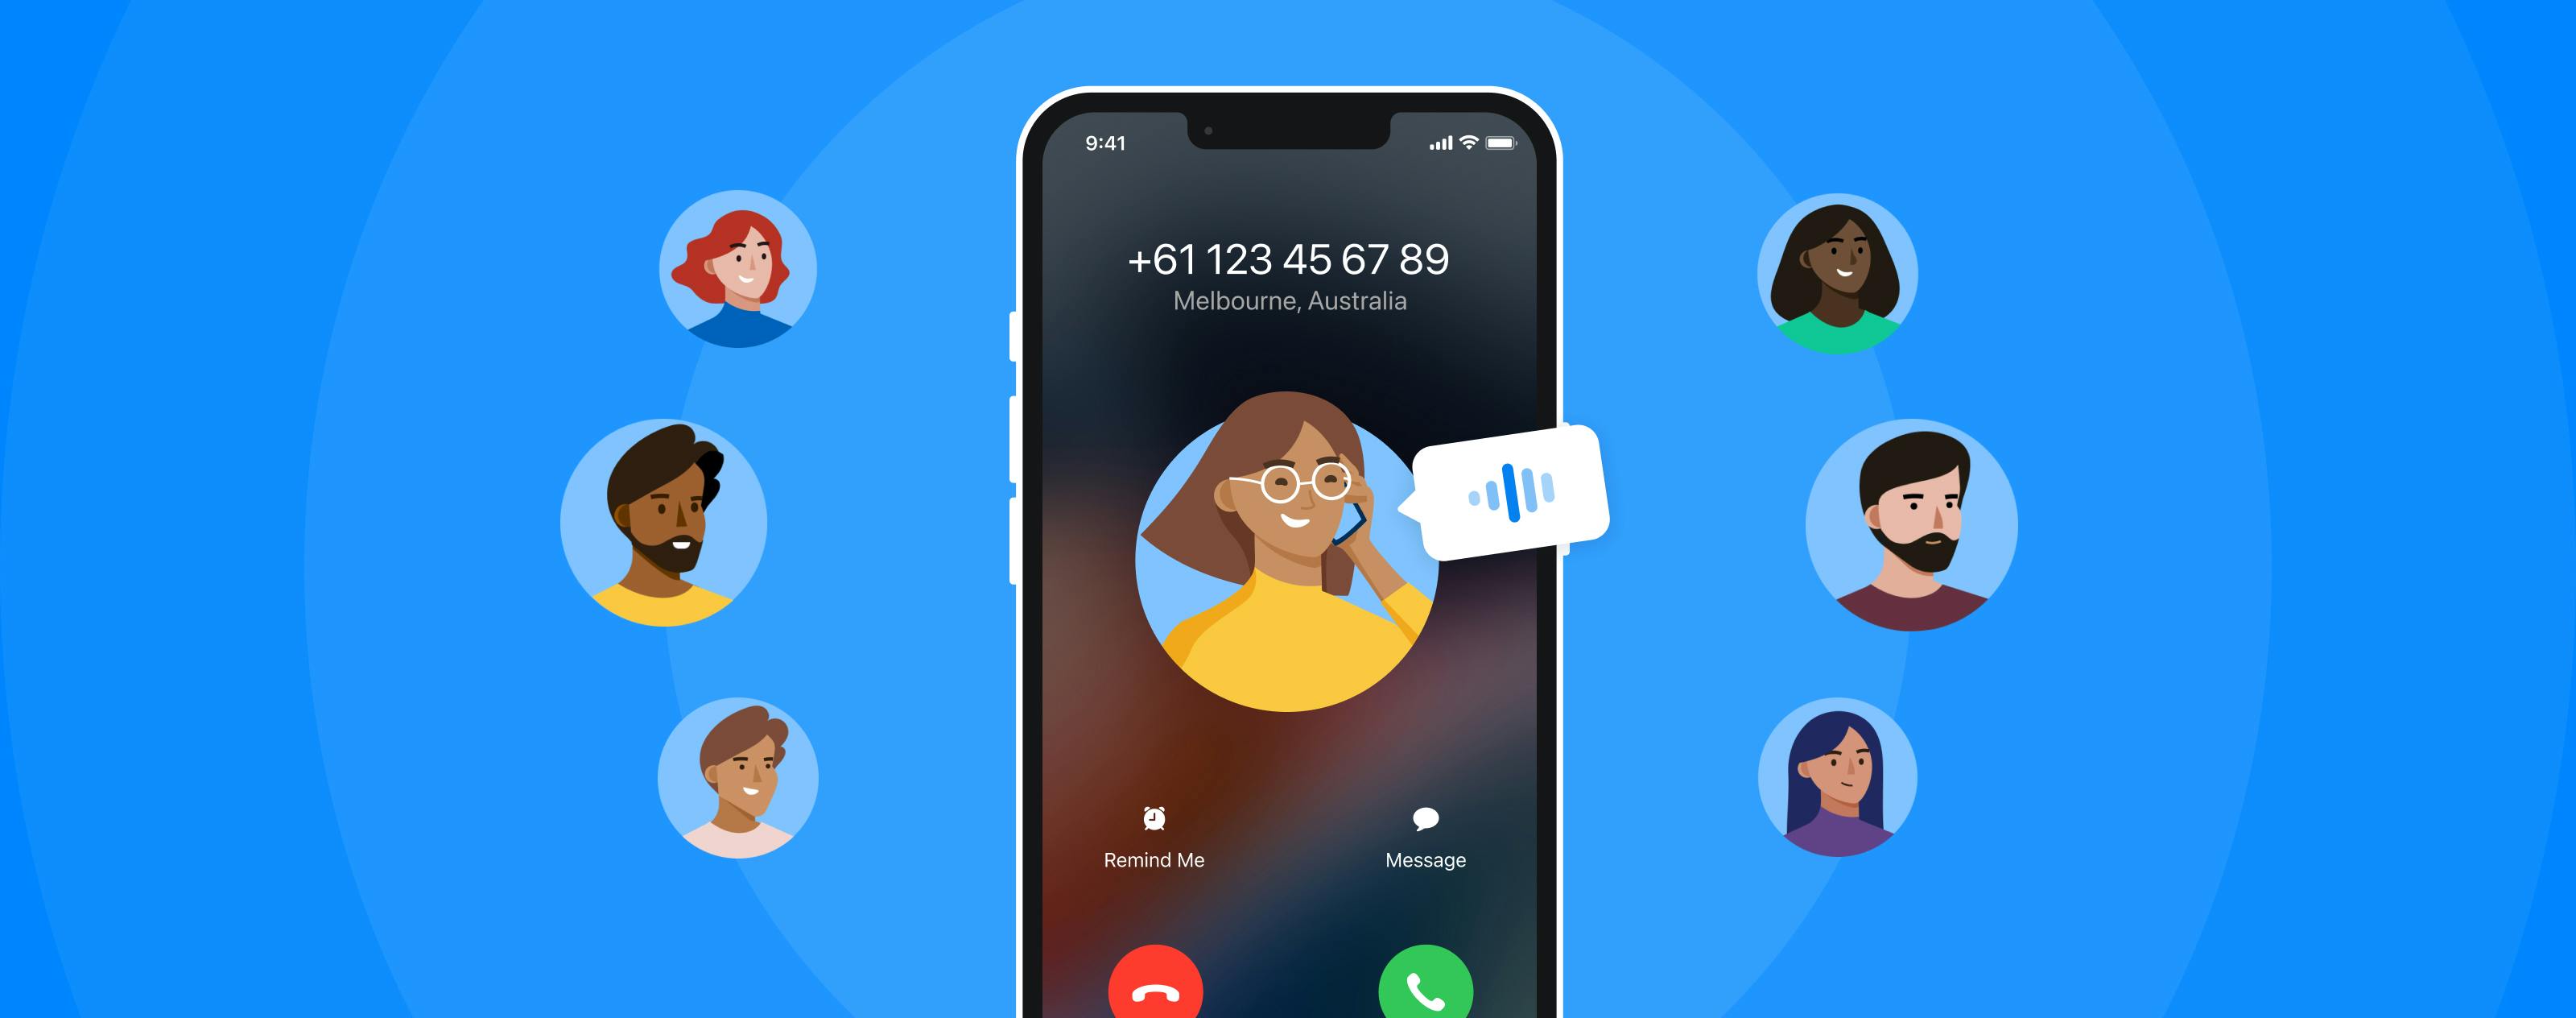 Image with a phone screen showing how the Truecaller Assistant answer your calls.